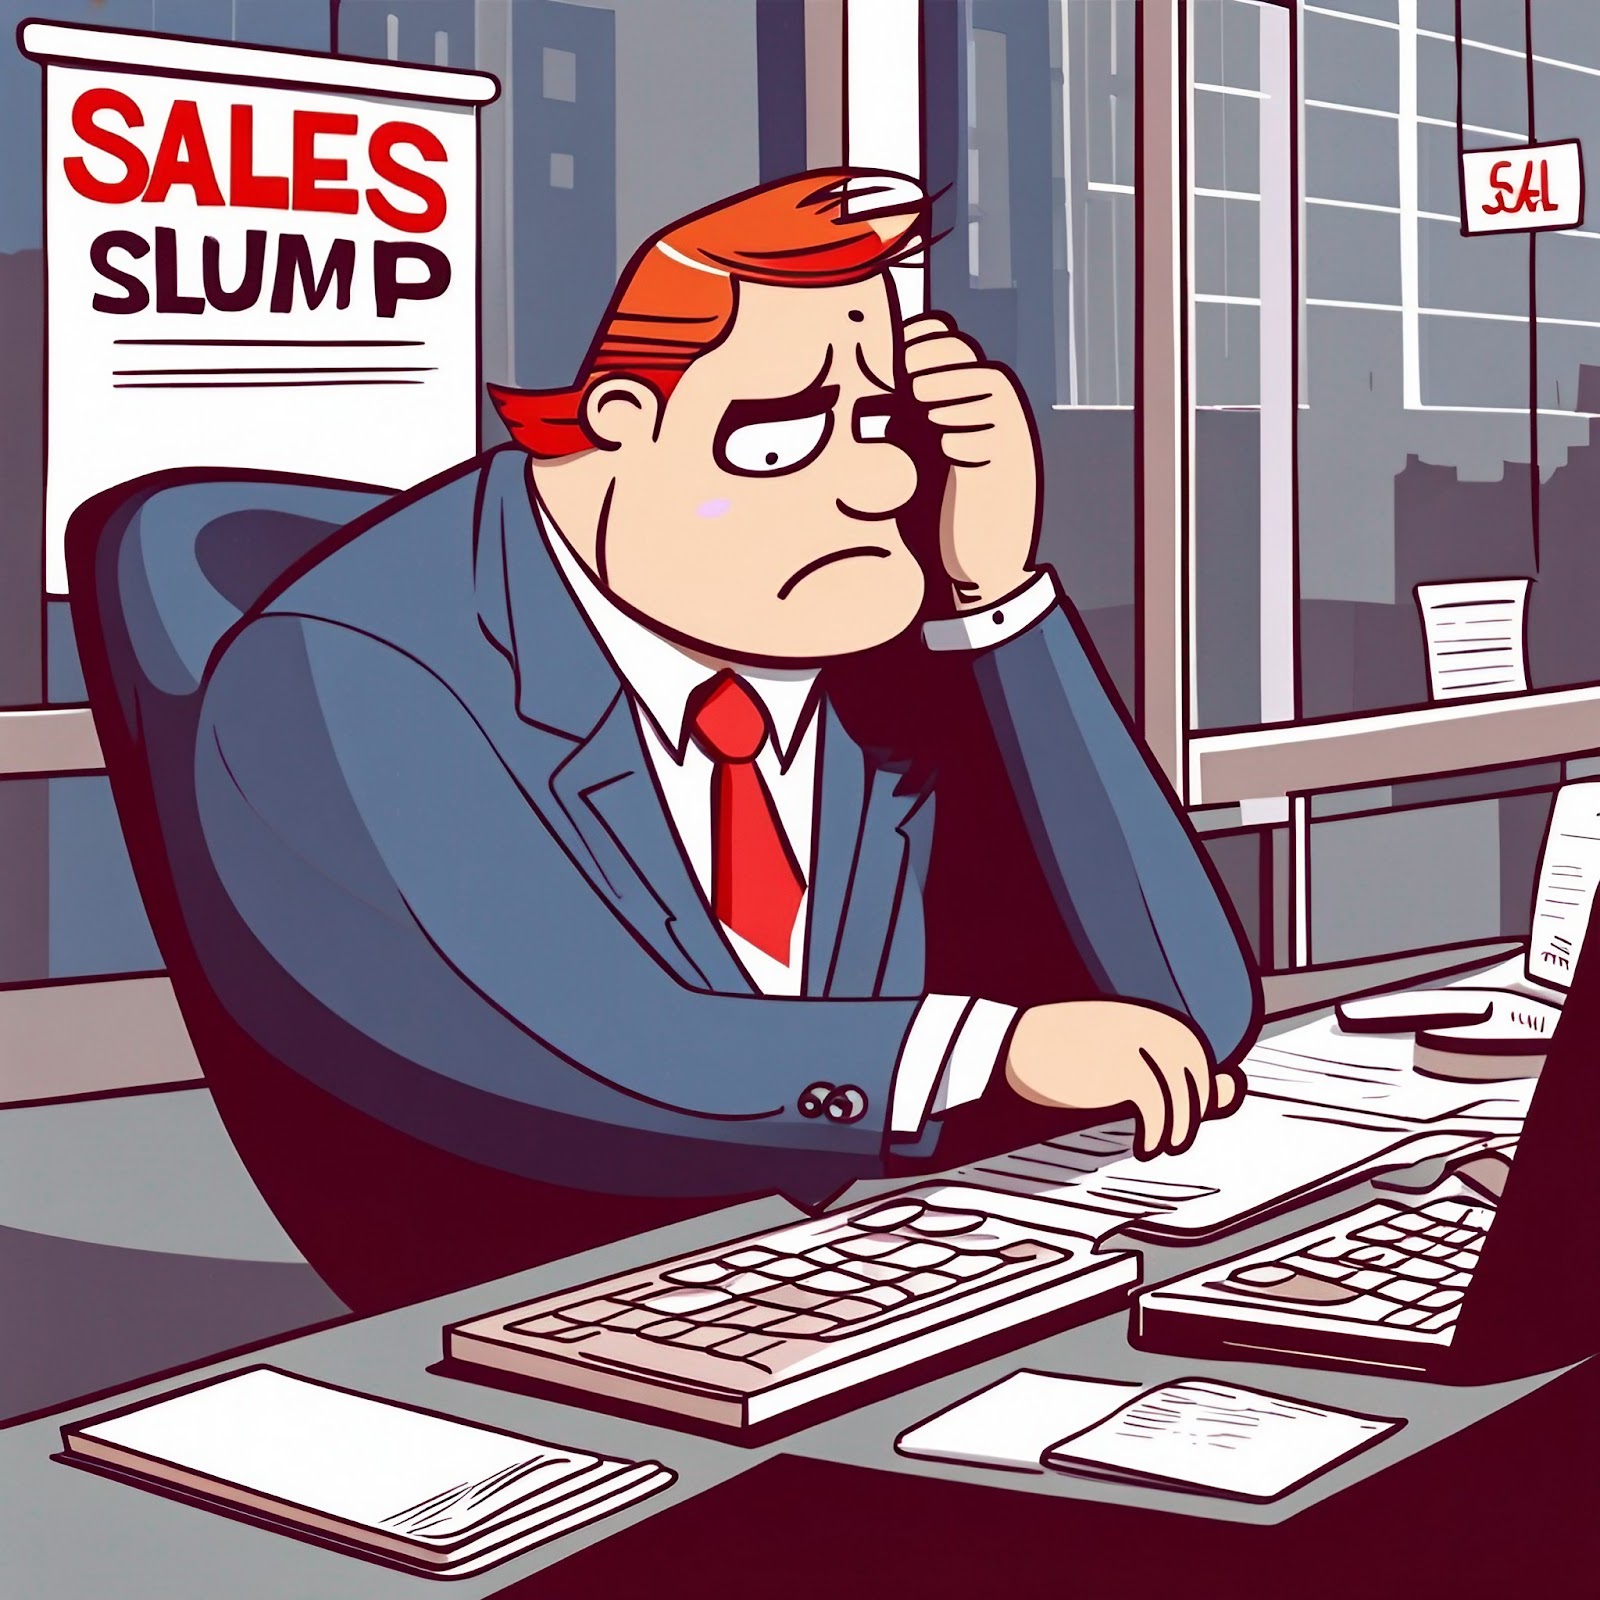 Identifying a sales slump early is key to managing it effectively.